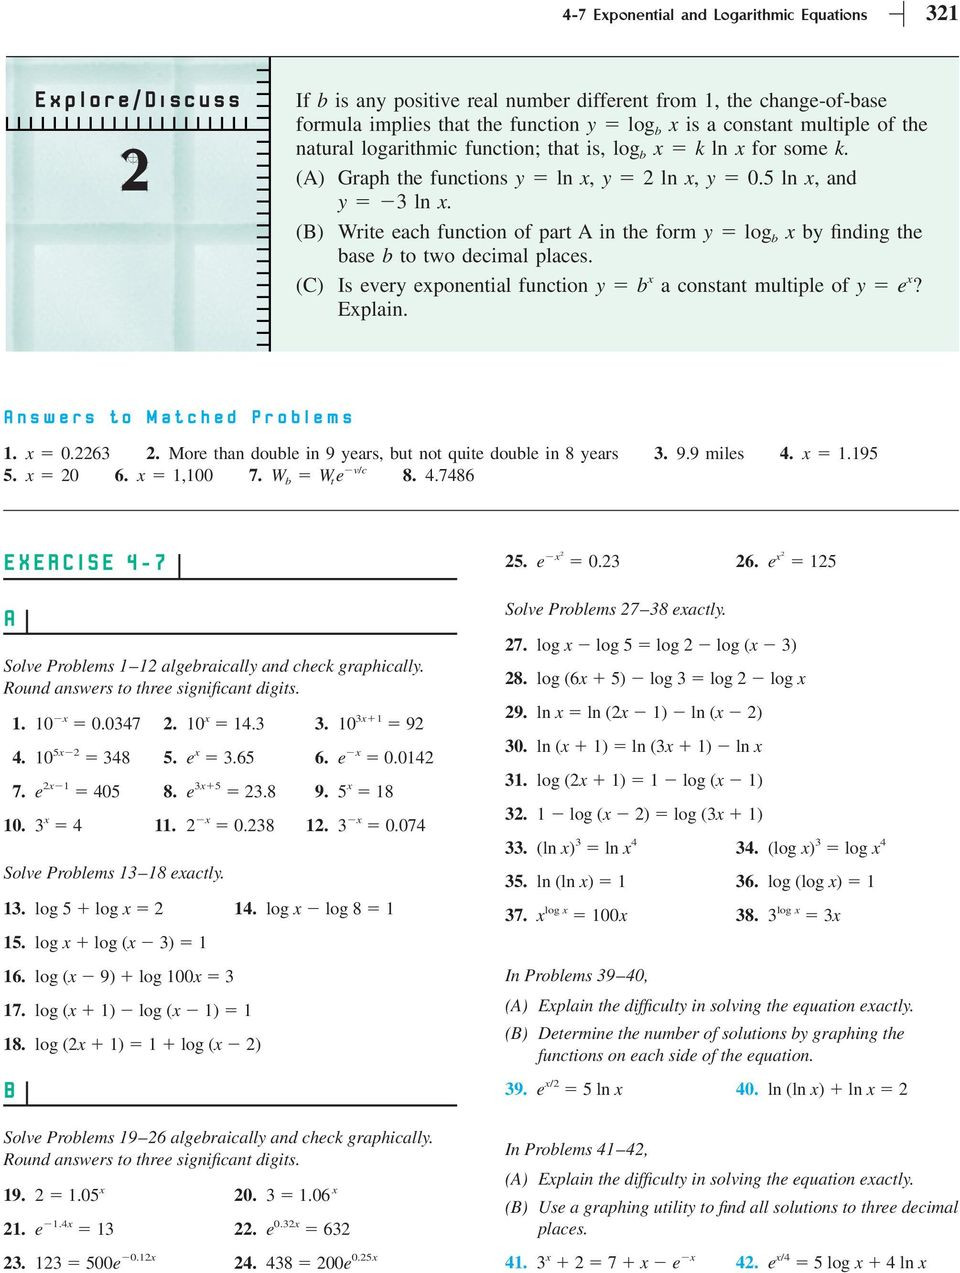 Exponential Functions Worksheet Answers Section 4 7 Exponential and Logarithmic Equations solving